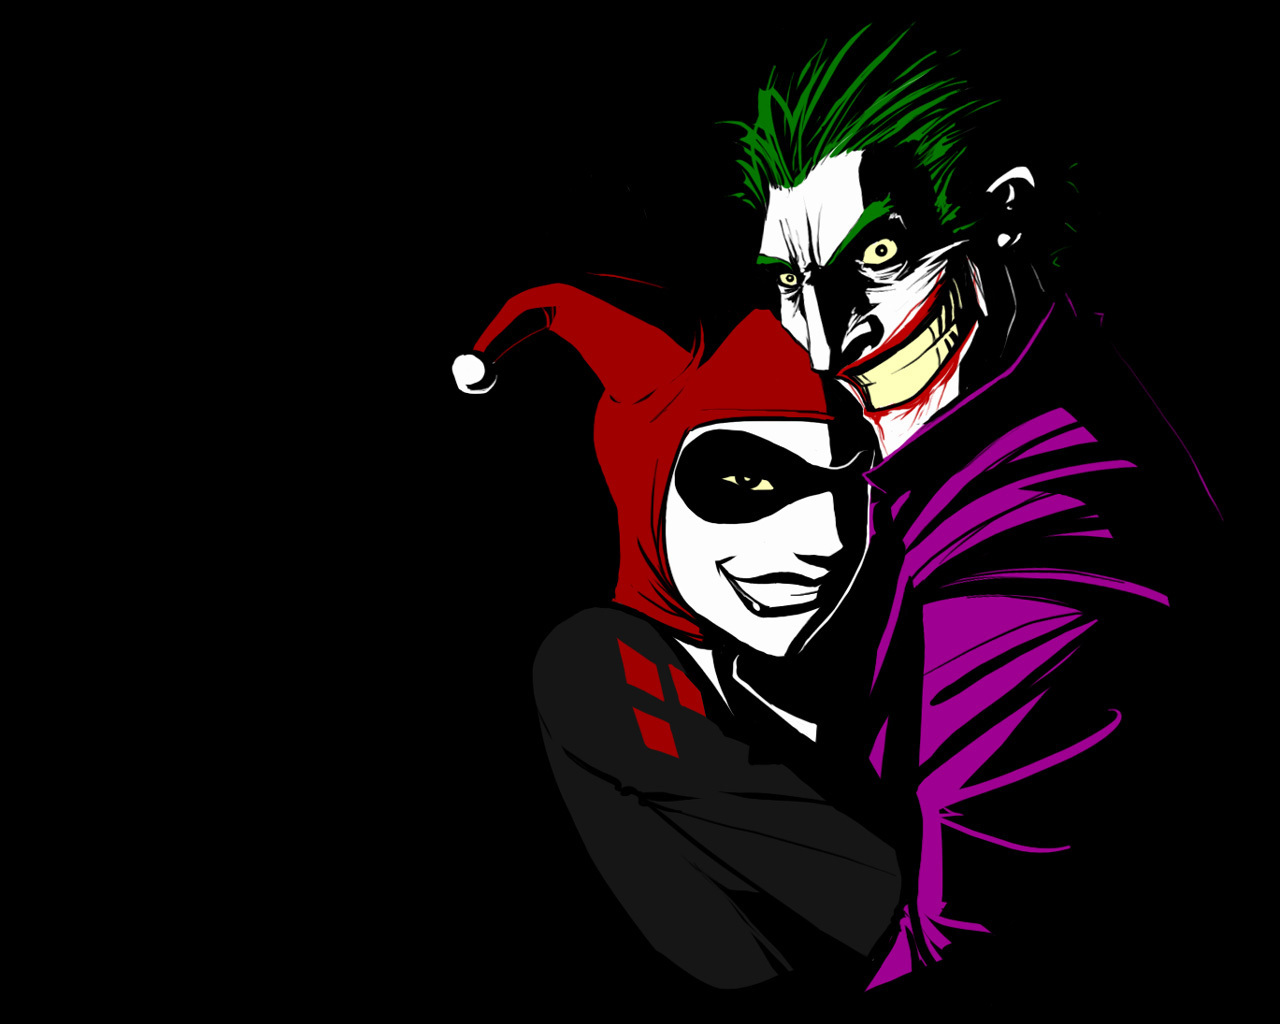 The Joker And Harley Quinn Image Amp Pictures Becuo